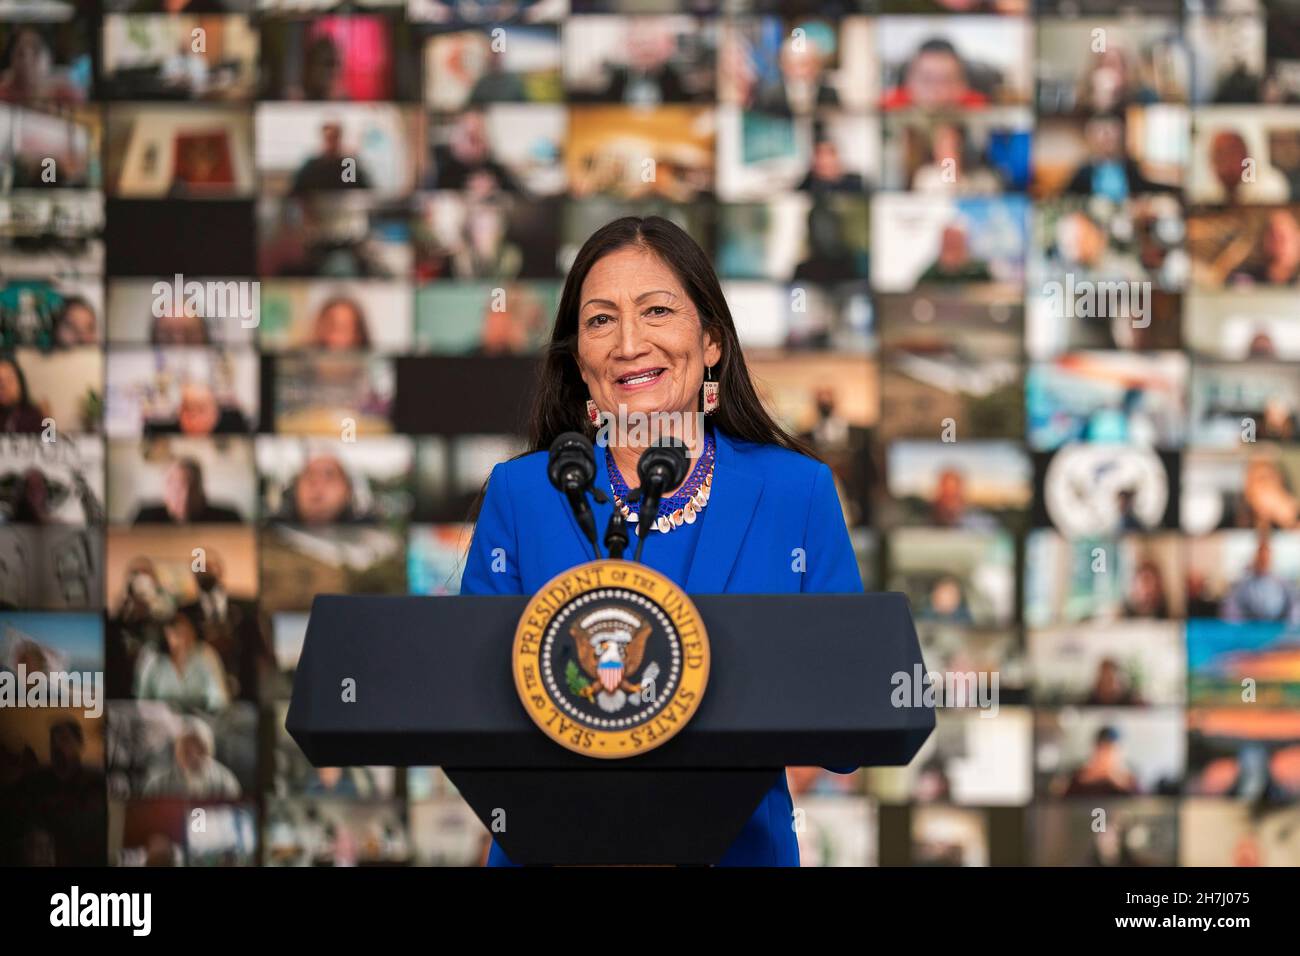 Washington, United States of America. 16 November, 2021. U.S Interior Secretary Deb Haaland delivers a virtual address to the White House Tribal Nations Summit by video link in the Eisenhower Executive Office Building Ceremonial Office November 15, 2021 in Washington, D.C. Credit: Tami A. Heilemann/U.S. Interior Department/Alamy Live News Stock Photo